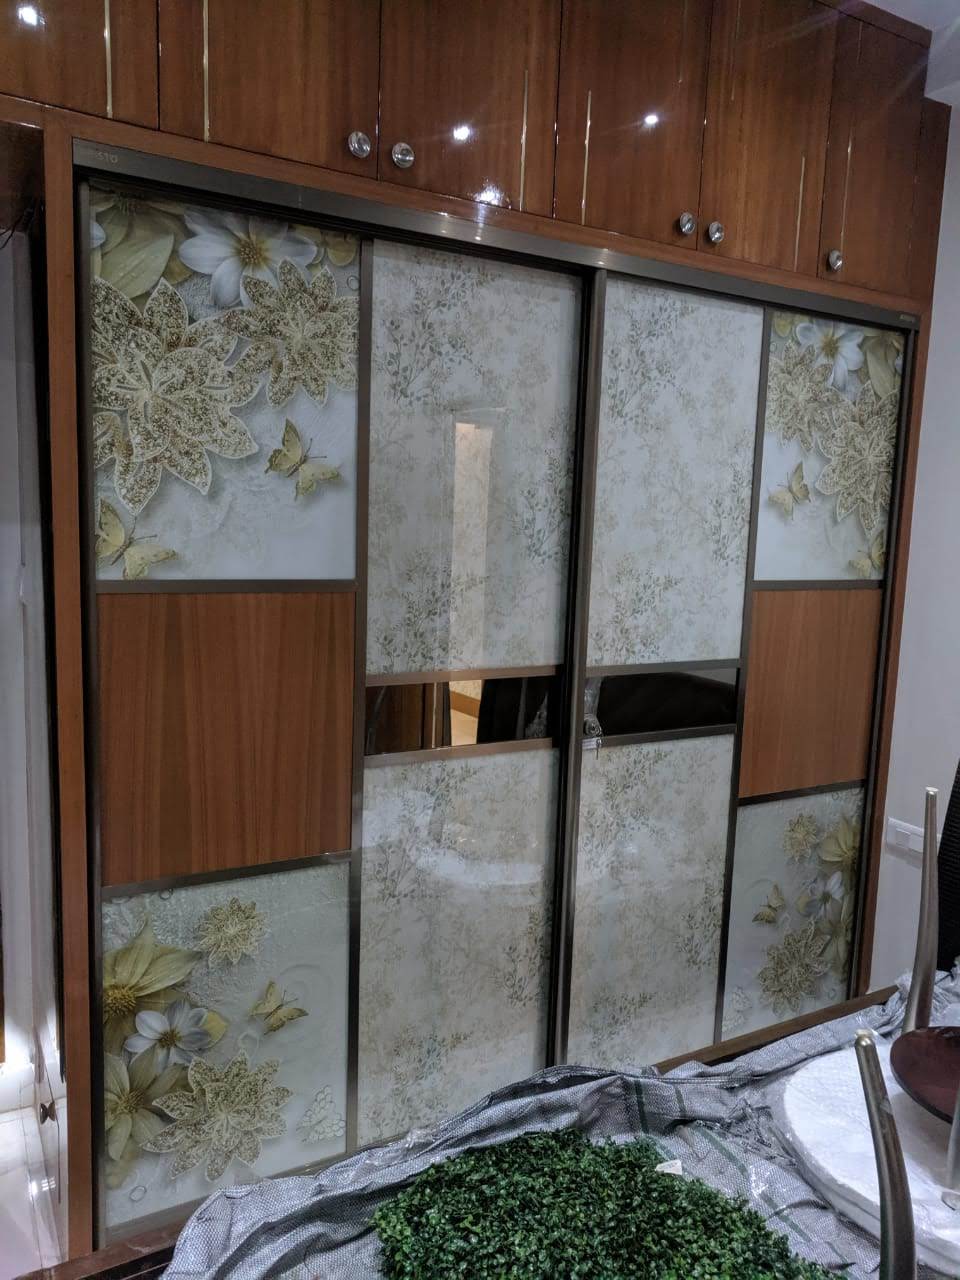 select-your-lacquer-glass-wardrobe-today-in-gurgaon-largest-manufacturing-brand-in-gurugram-gurgaon-india